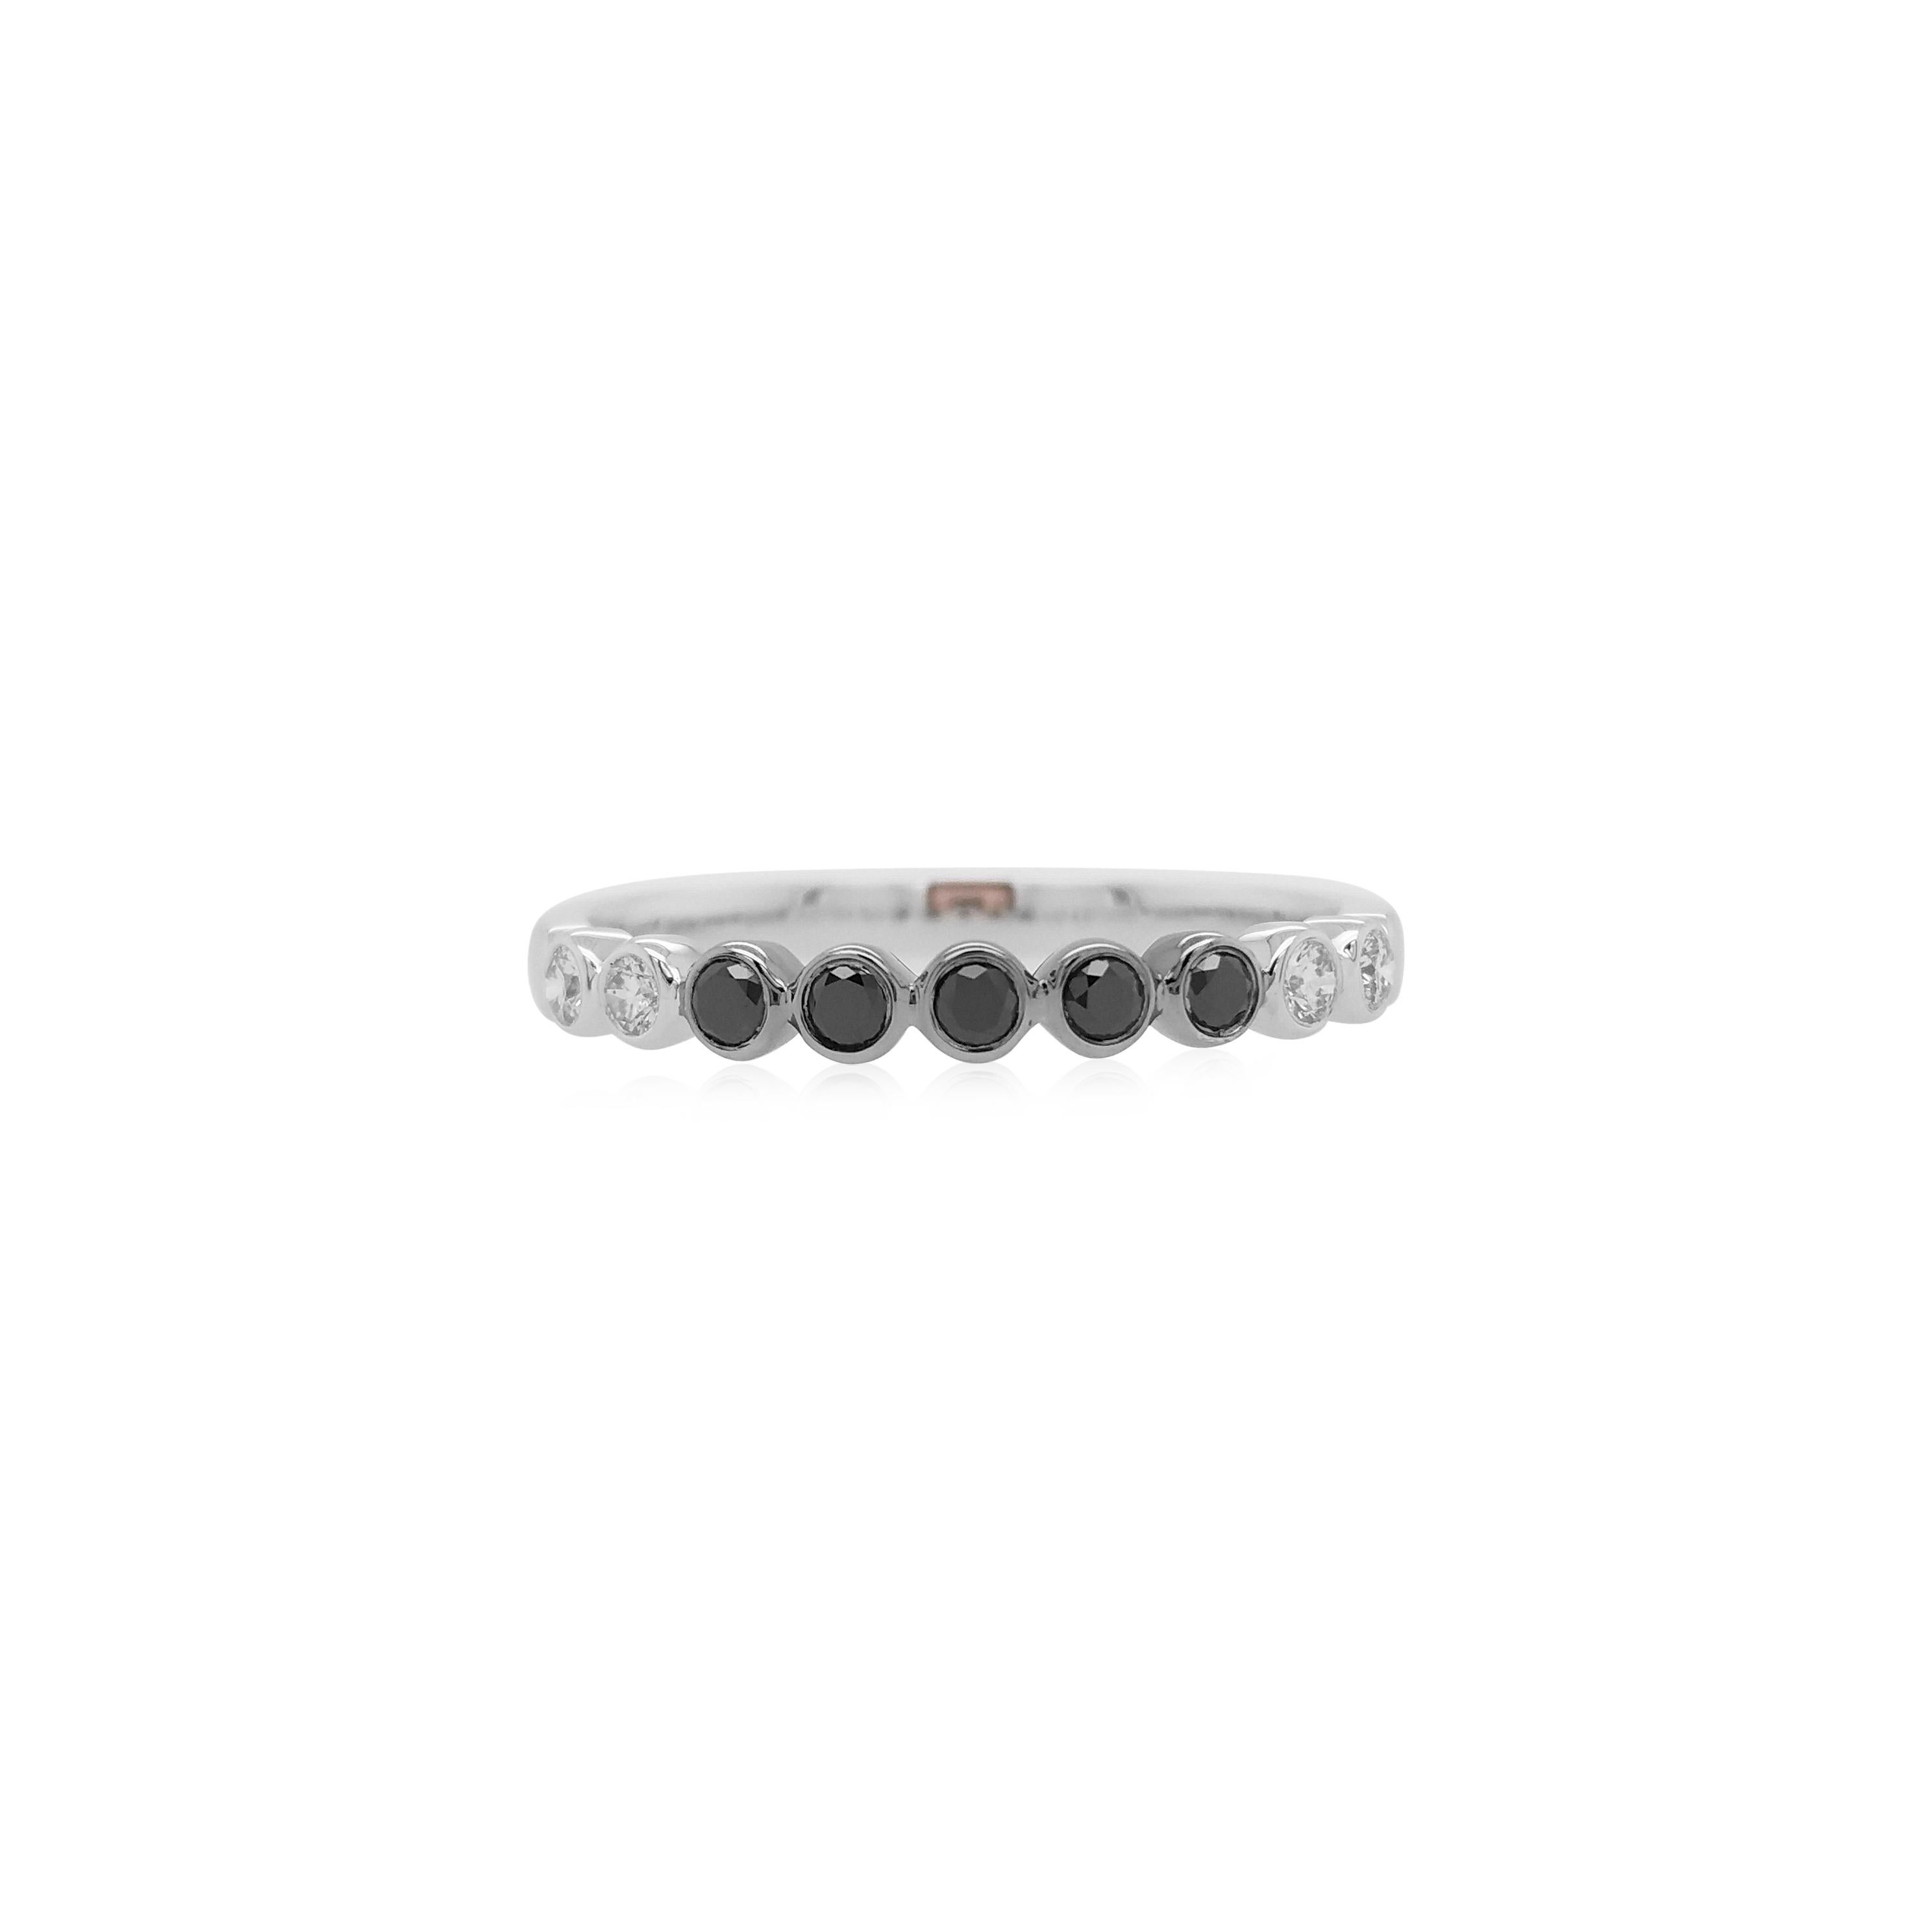 A simple yet elegant ring with black diamonds to add a unique style to your everyday look.

Black Diamonds- 0.13 cts
White Diamond - 0.09 cts

HYT Jewelry is a privately owned company headquartered in Hong Kong, with branches in Tokyo, New York, and